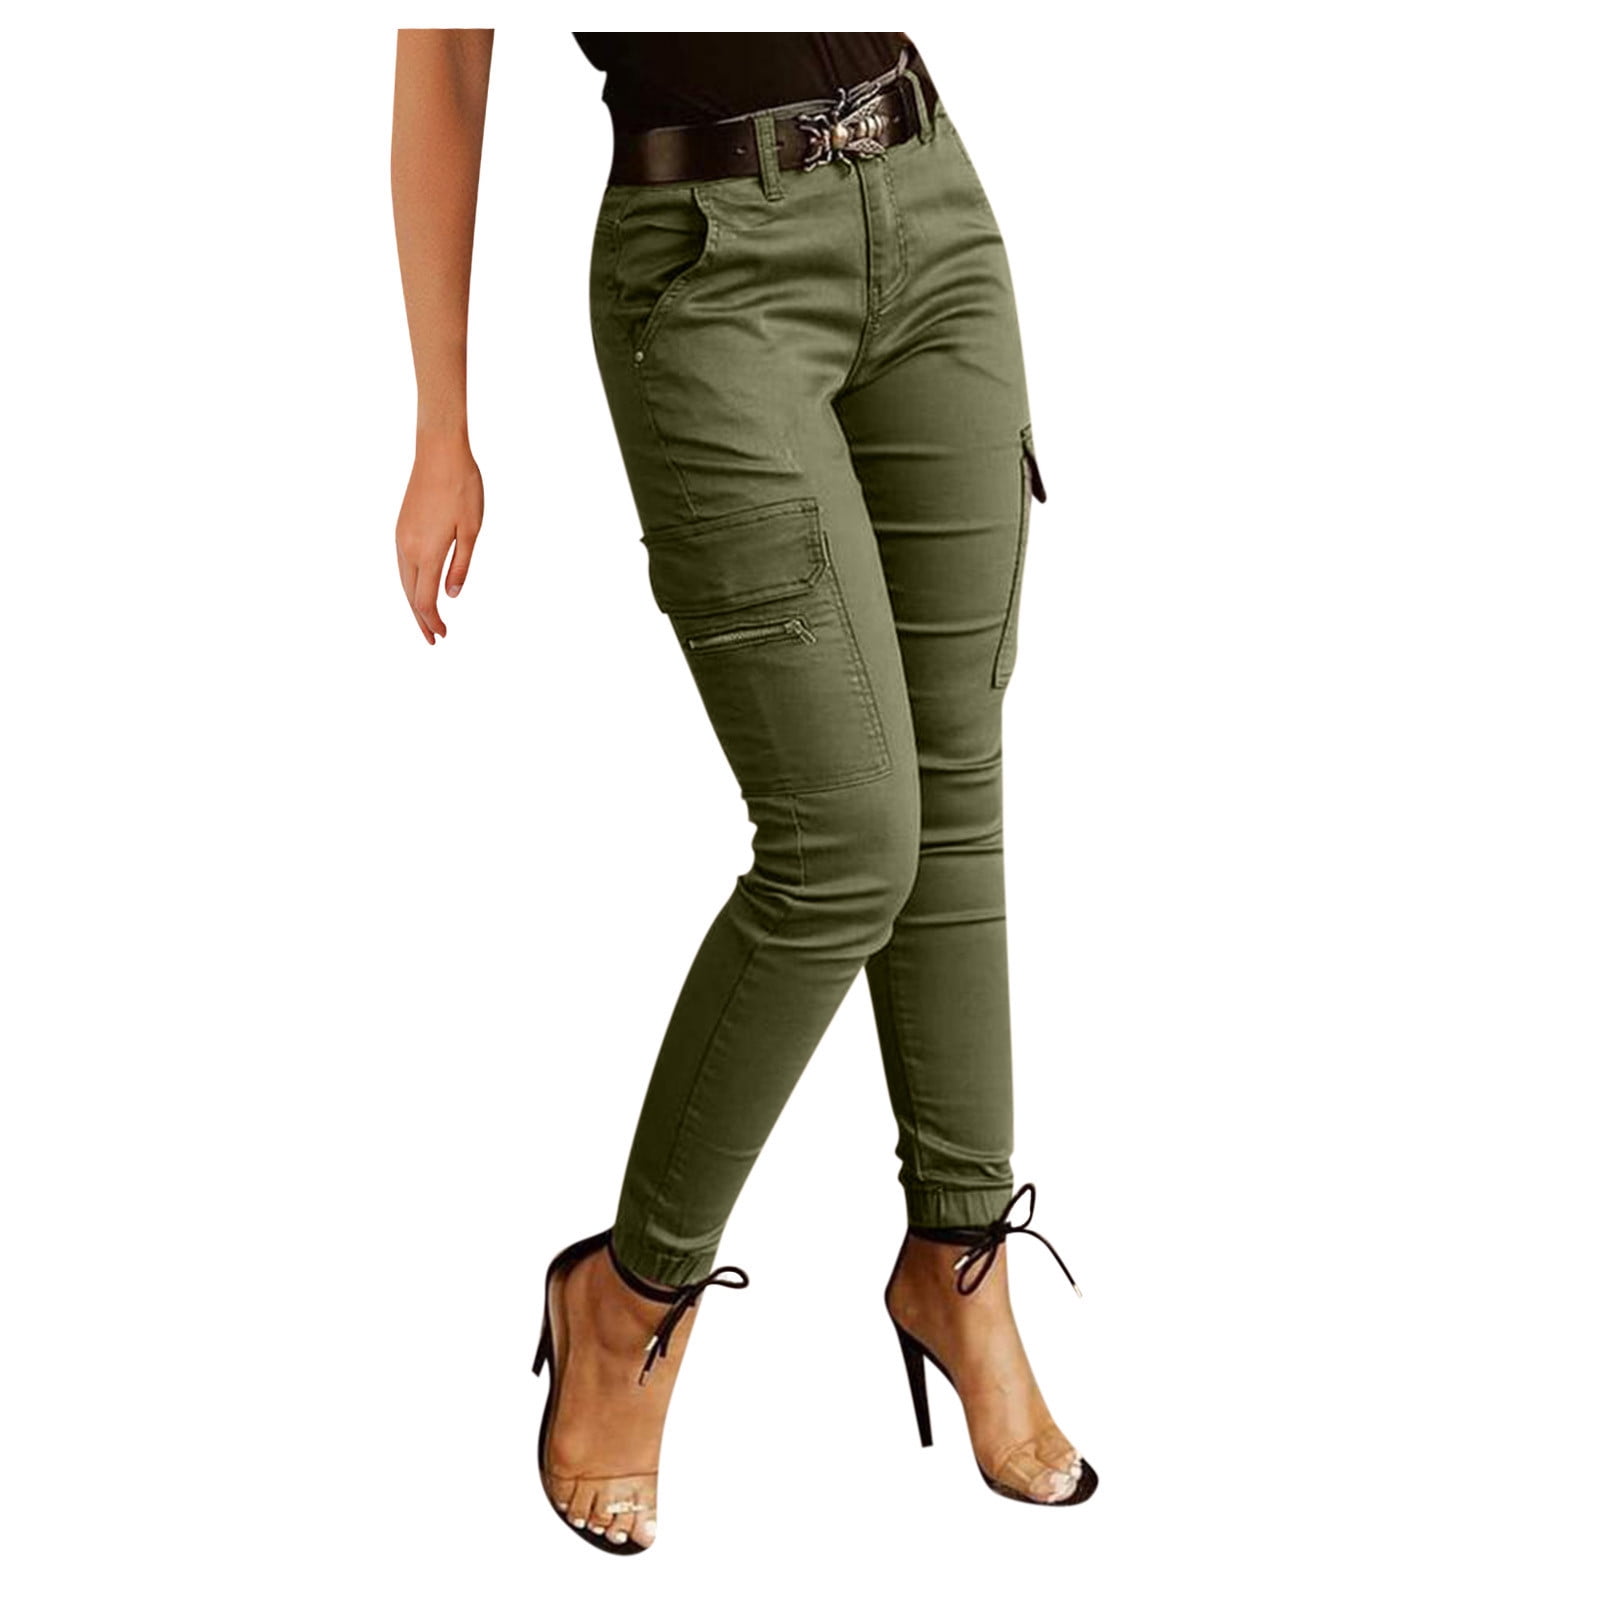 Cargo Leggings with Pockets for Women Casual Skinny Pockets High Waist Pants  Stretch Bound Feet Ripstop Cargo Trouser Army Green at  Women's  Clothing store